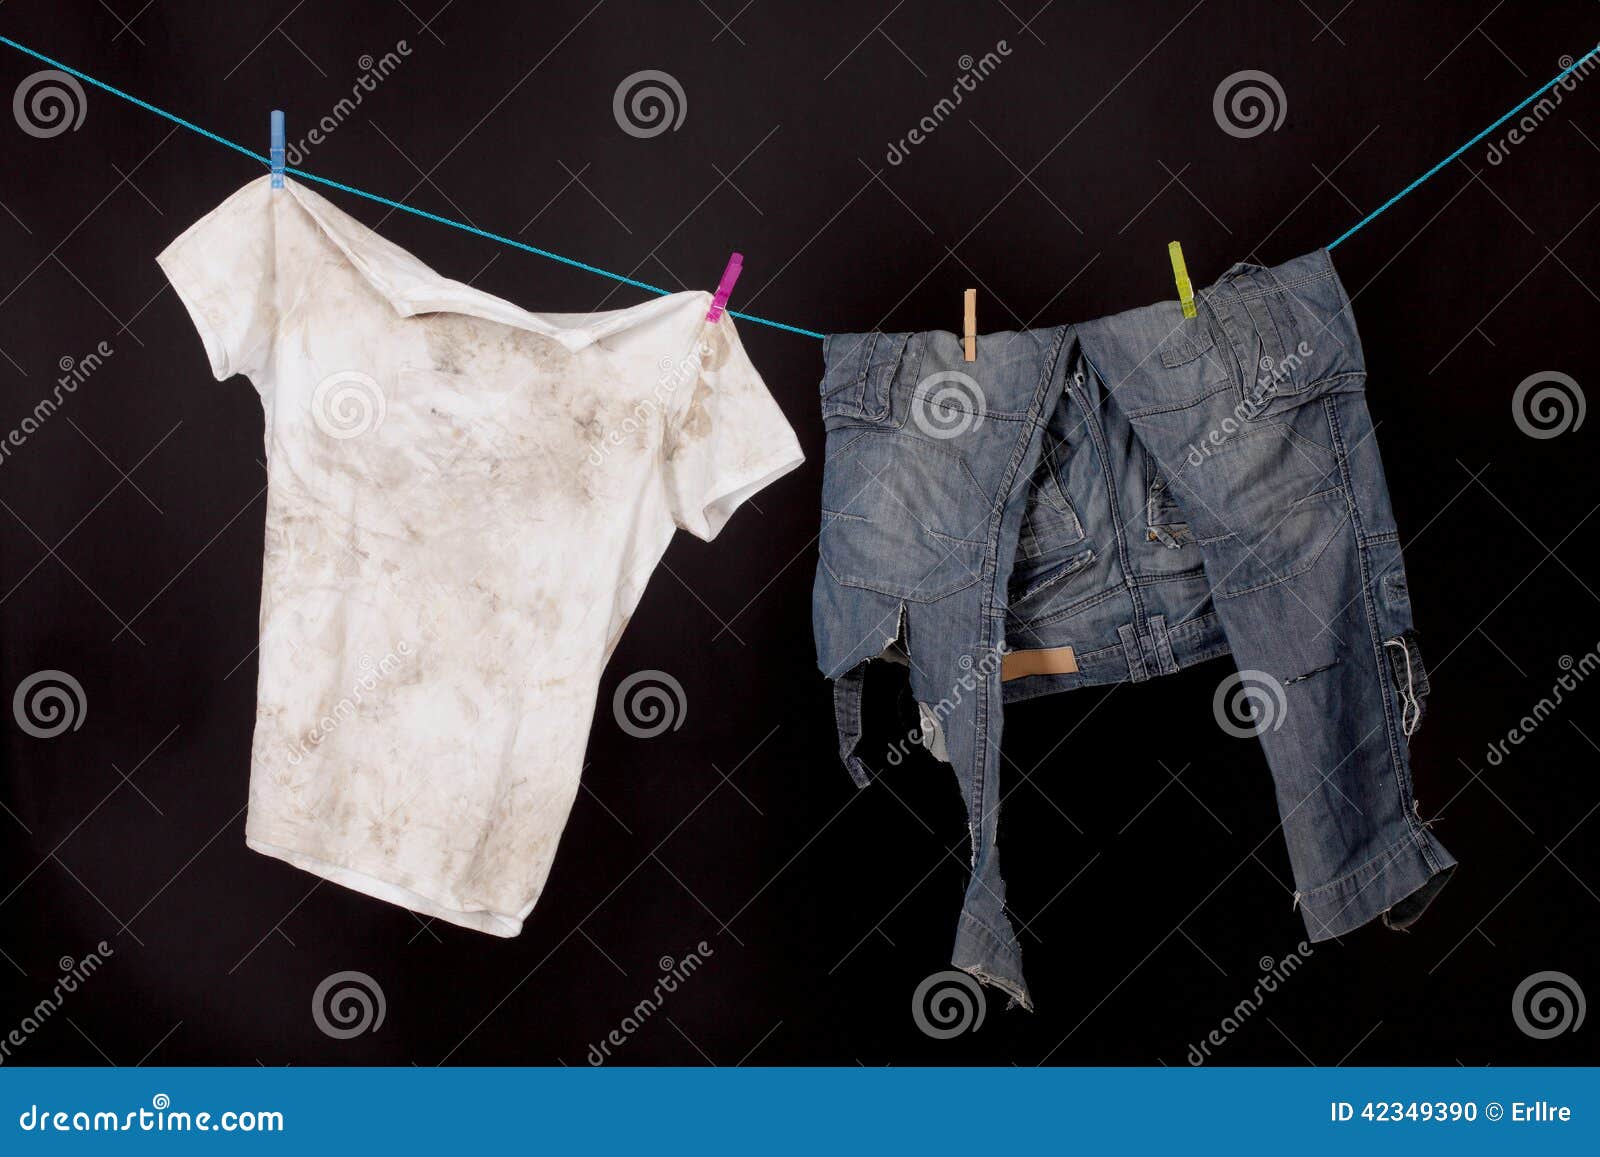 Dirty shirt and trousers stock photo. Image of wind, laundry - 42349390